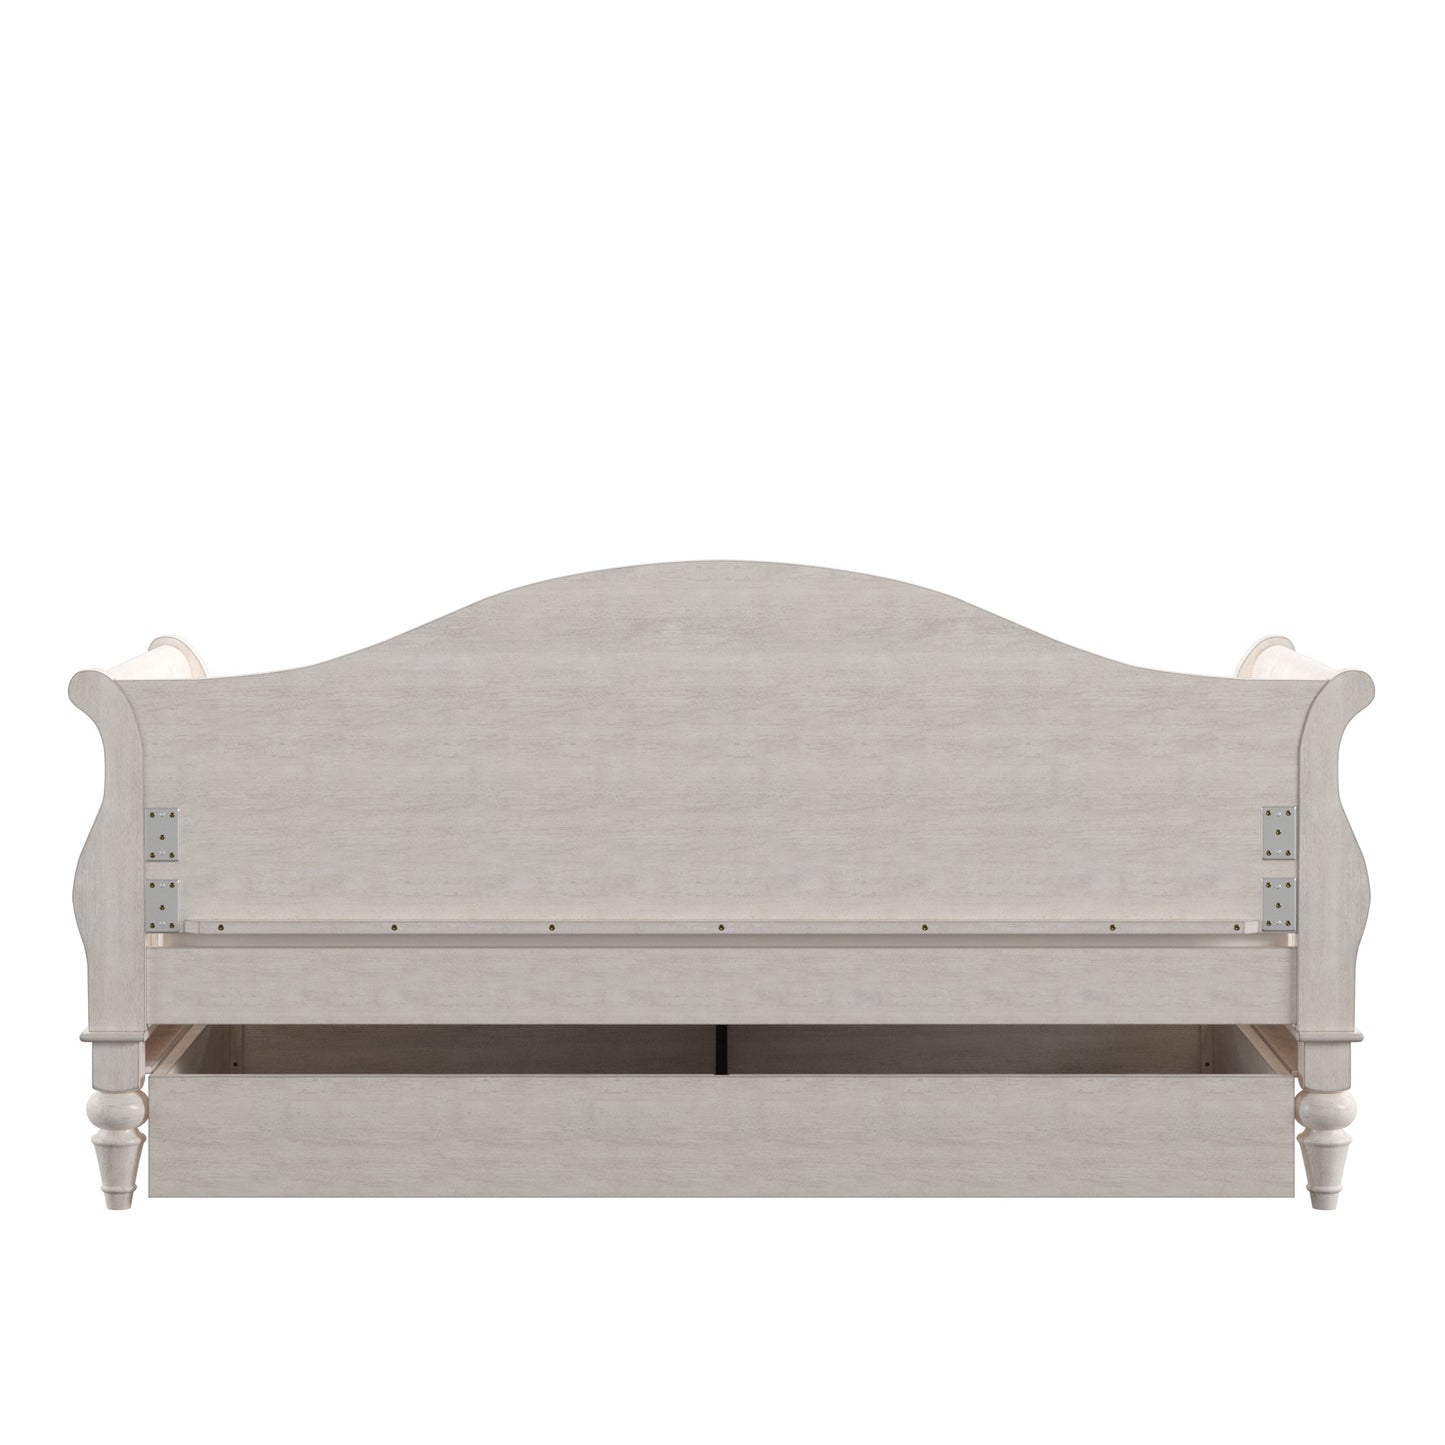 Traditional Wood Slat Daybed - Antique White, With Trundle